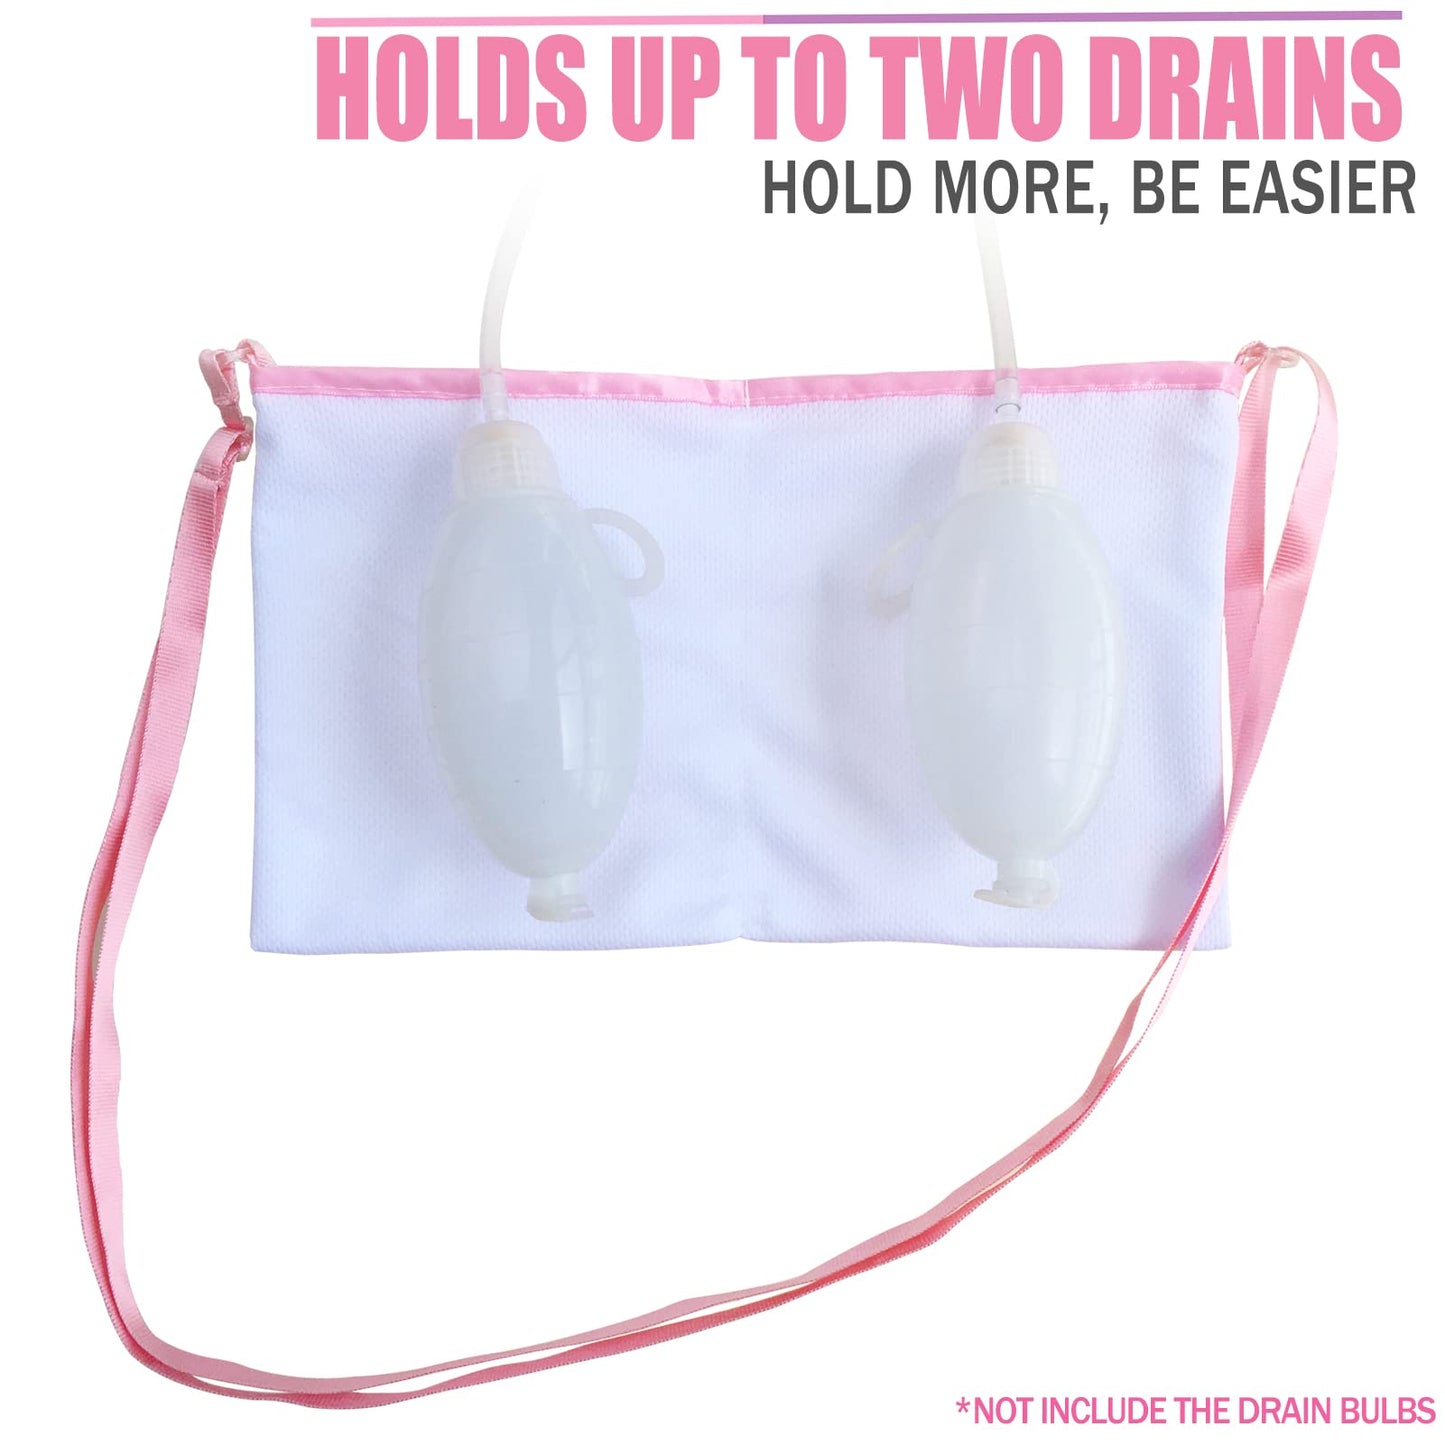 Quick Dry Mastectomy Drain Shower Bag Drainage Pouch Holder Tummy Tuck Post Surgery Supplies, Stretchy Post JP Drains Management Pockets Breast Reconstruction/Abdomina/Explant, White